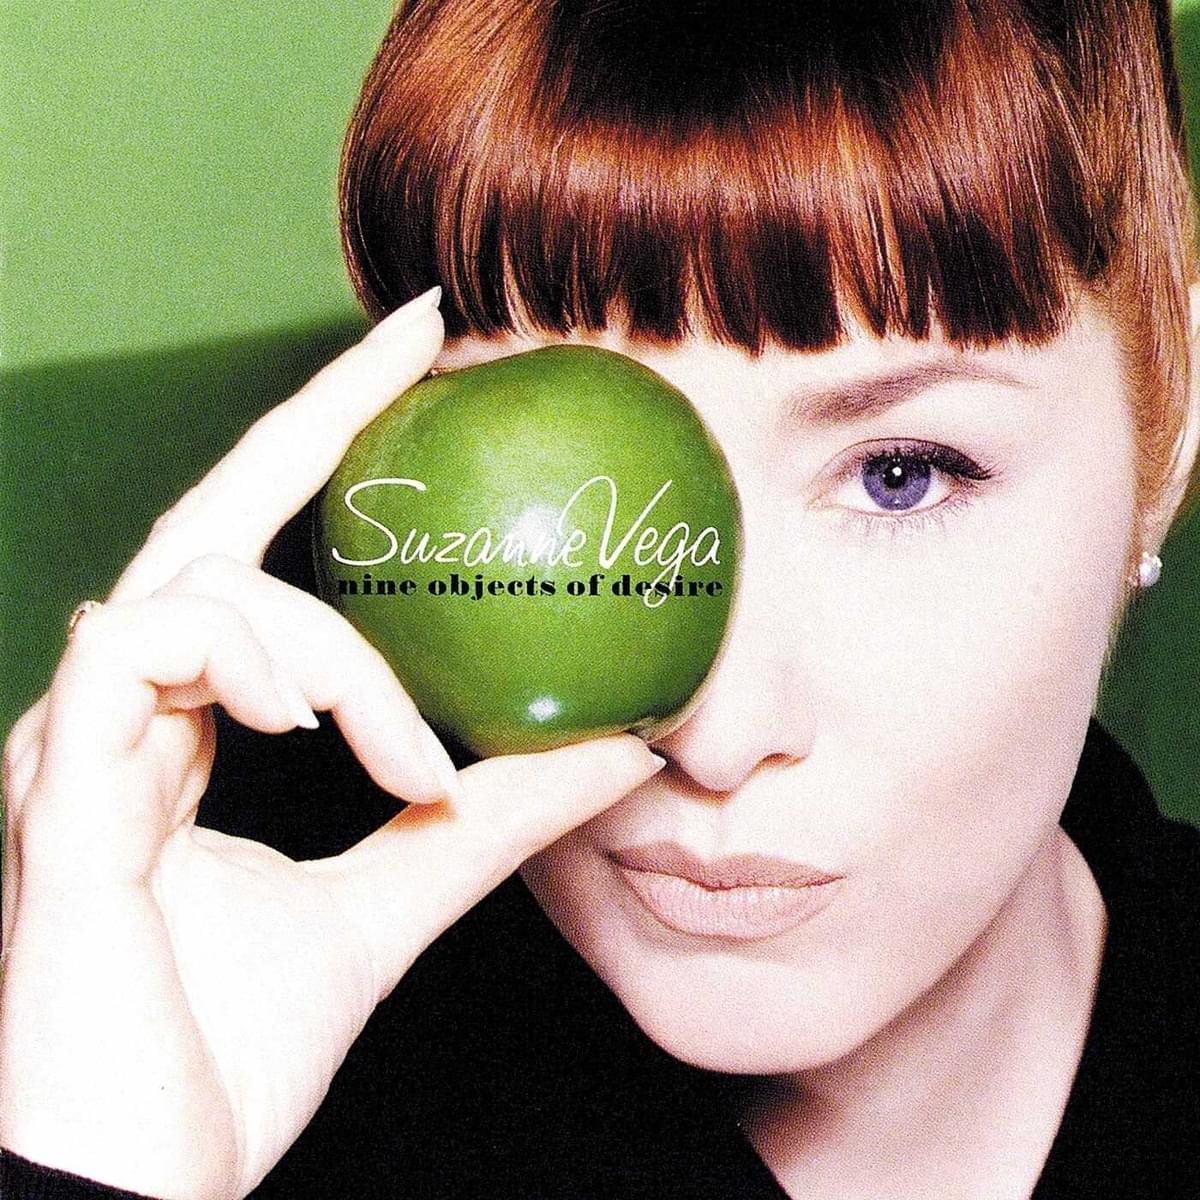 Cover of Suzanne Vega's 1996 album Nine Objects of Desire